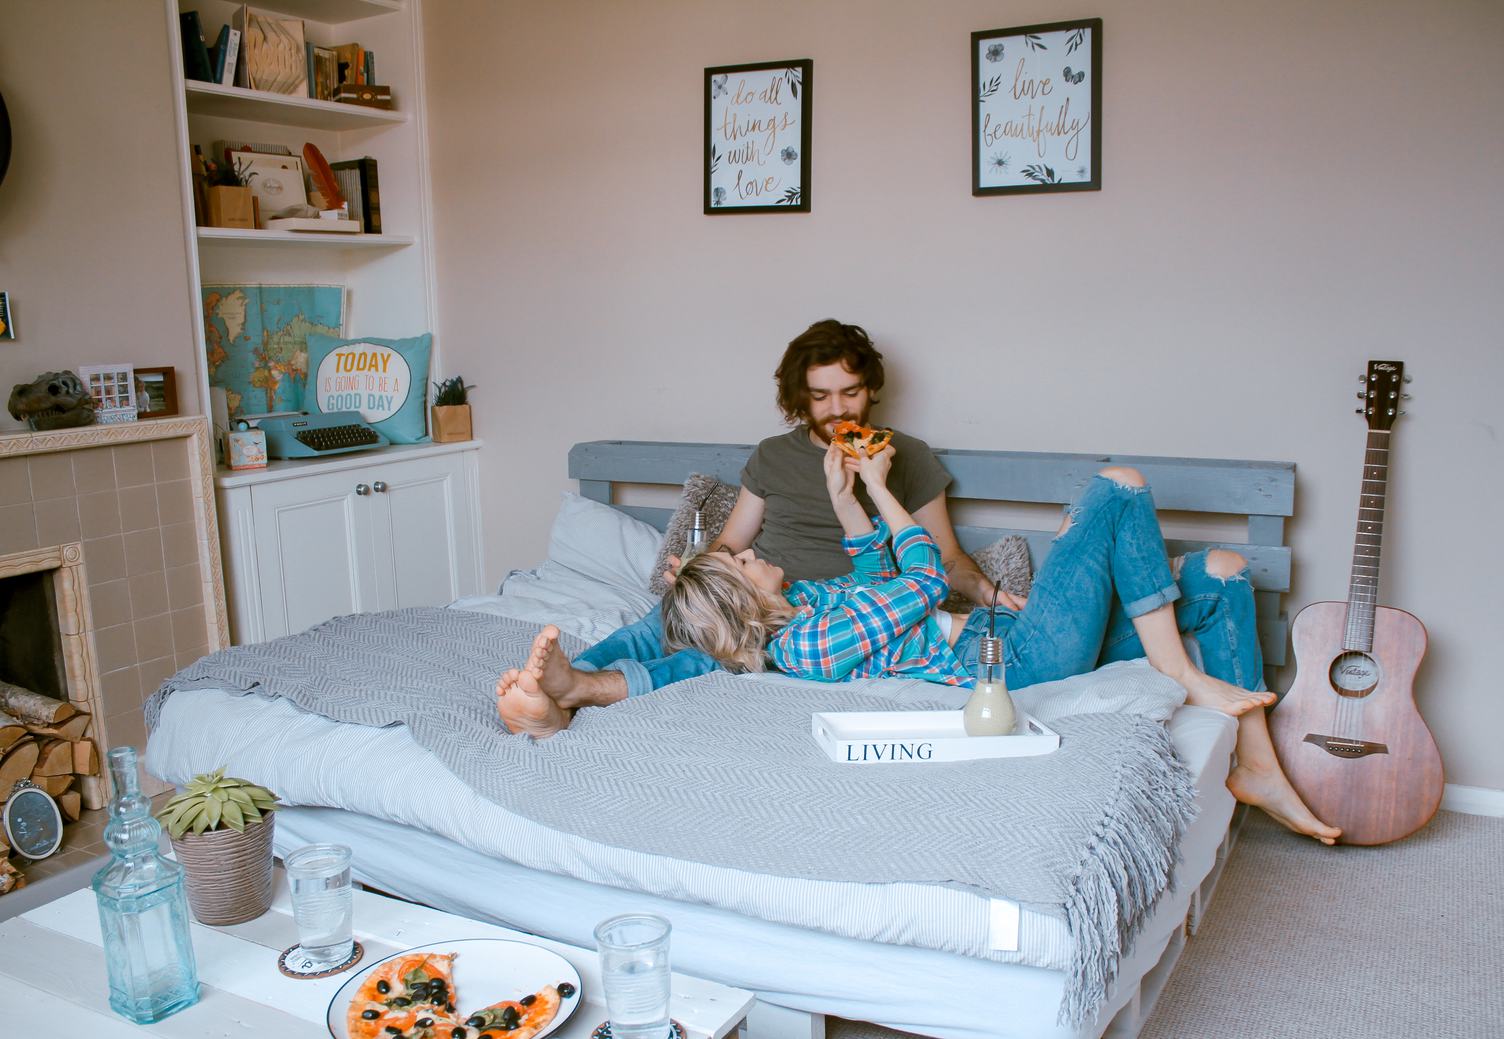 Couple Feeding each other in Bed with Pizza